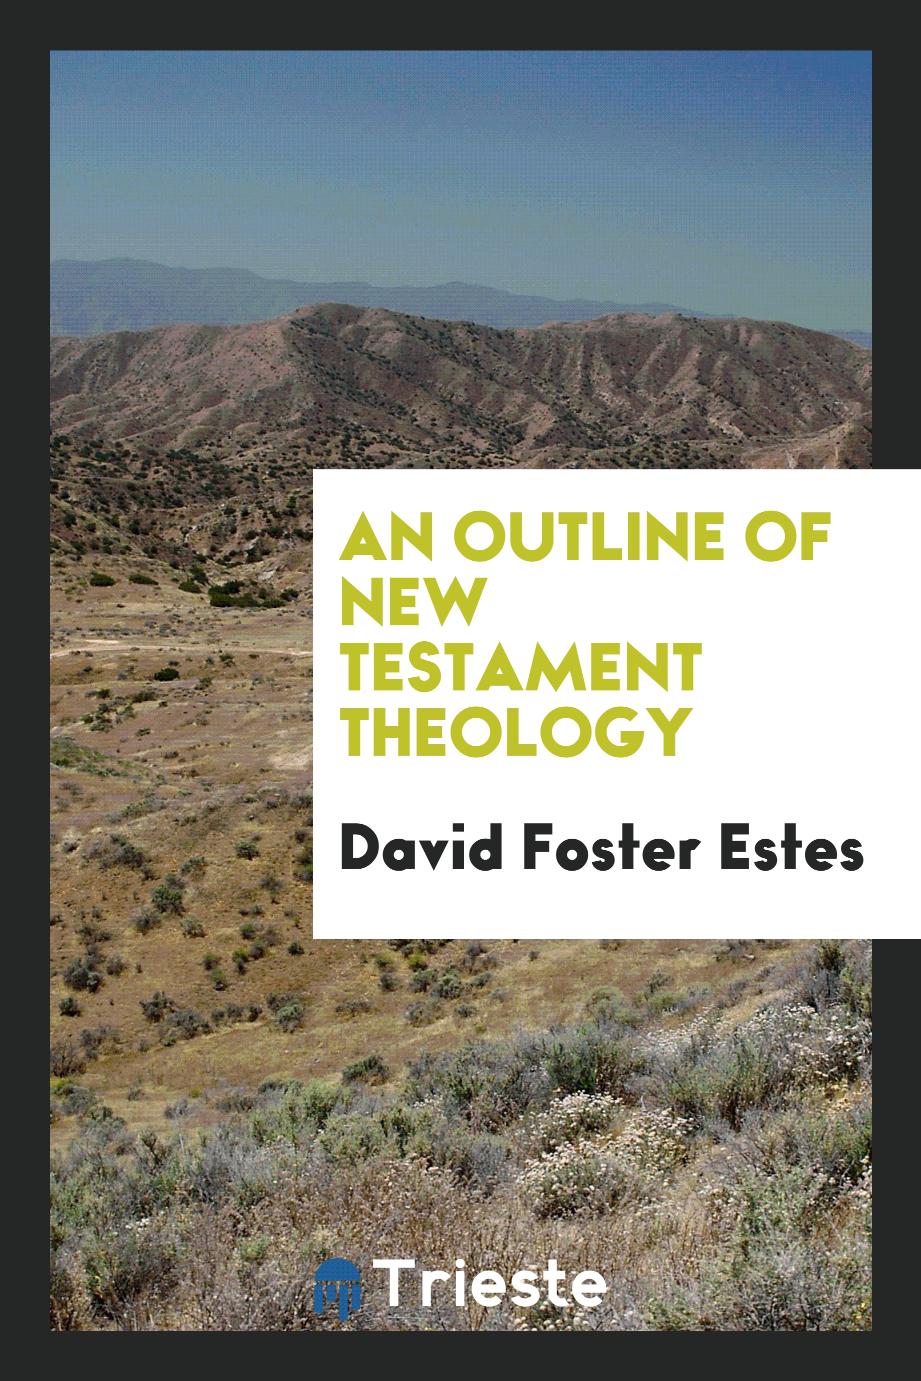 An outline of New Testament theology